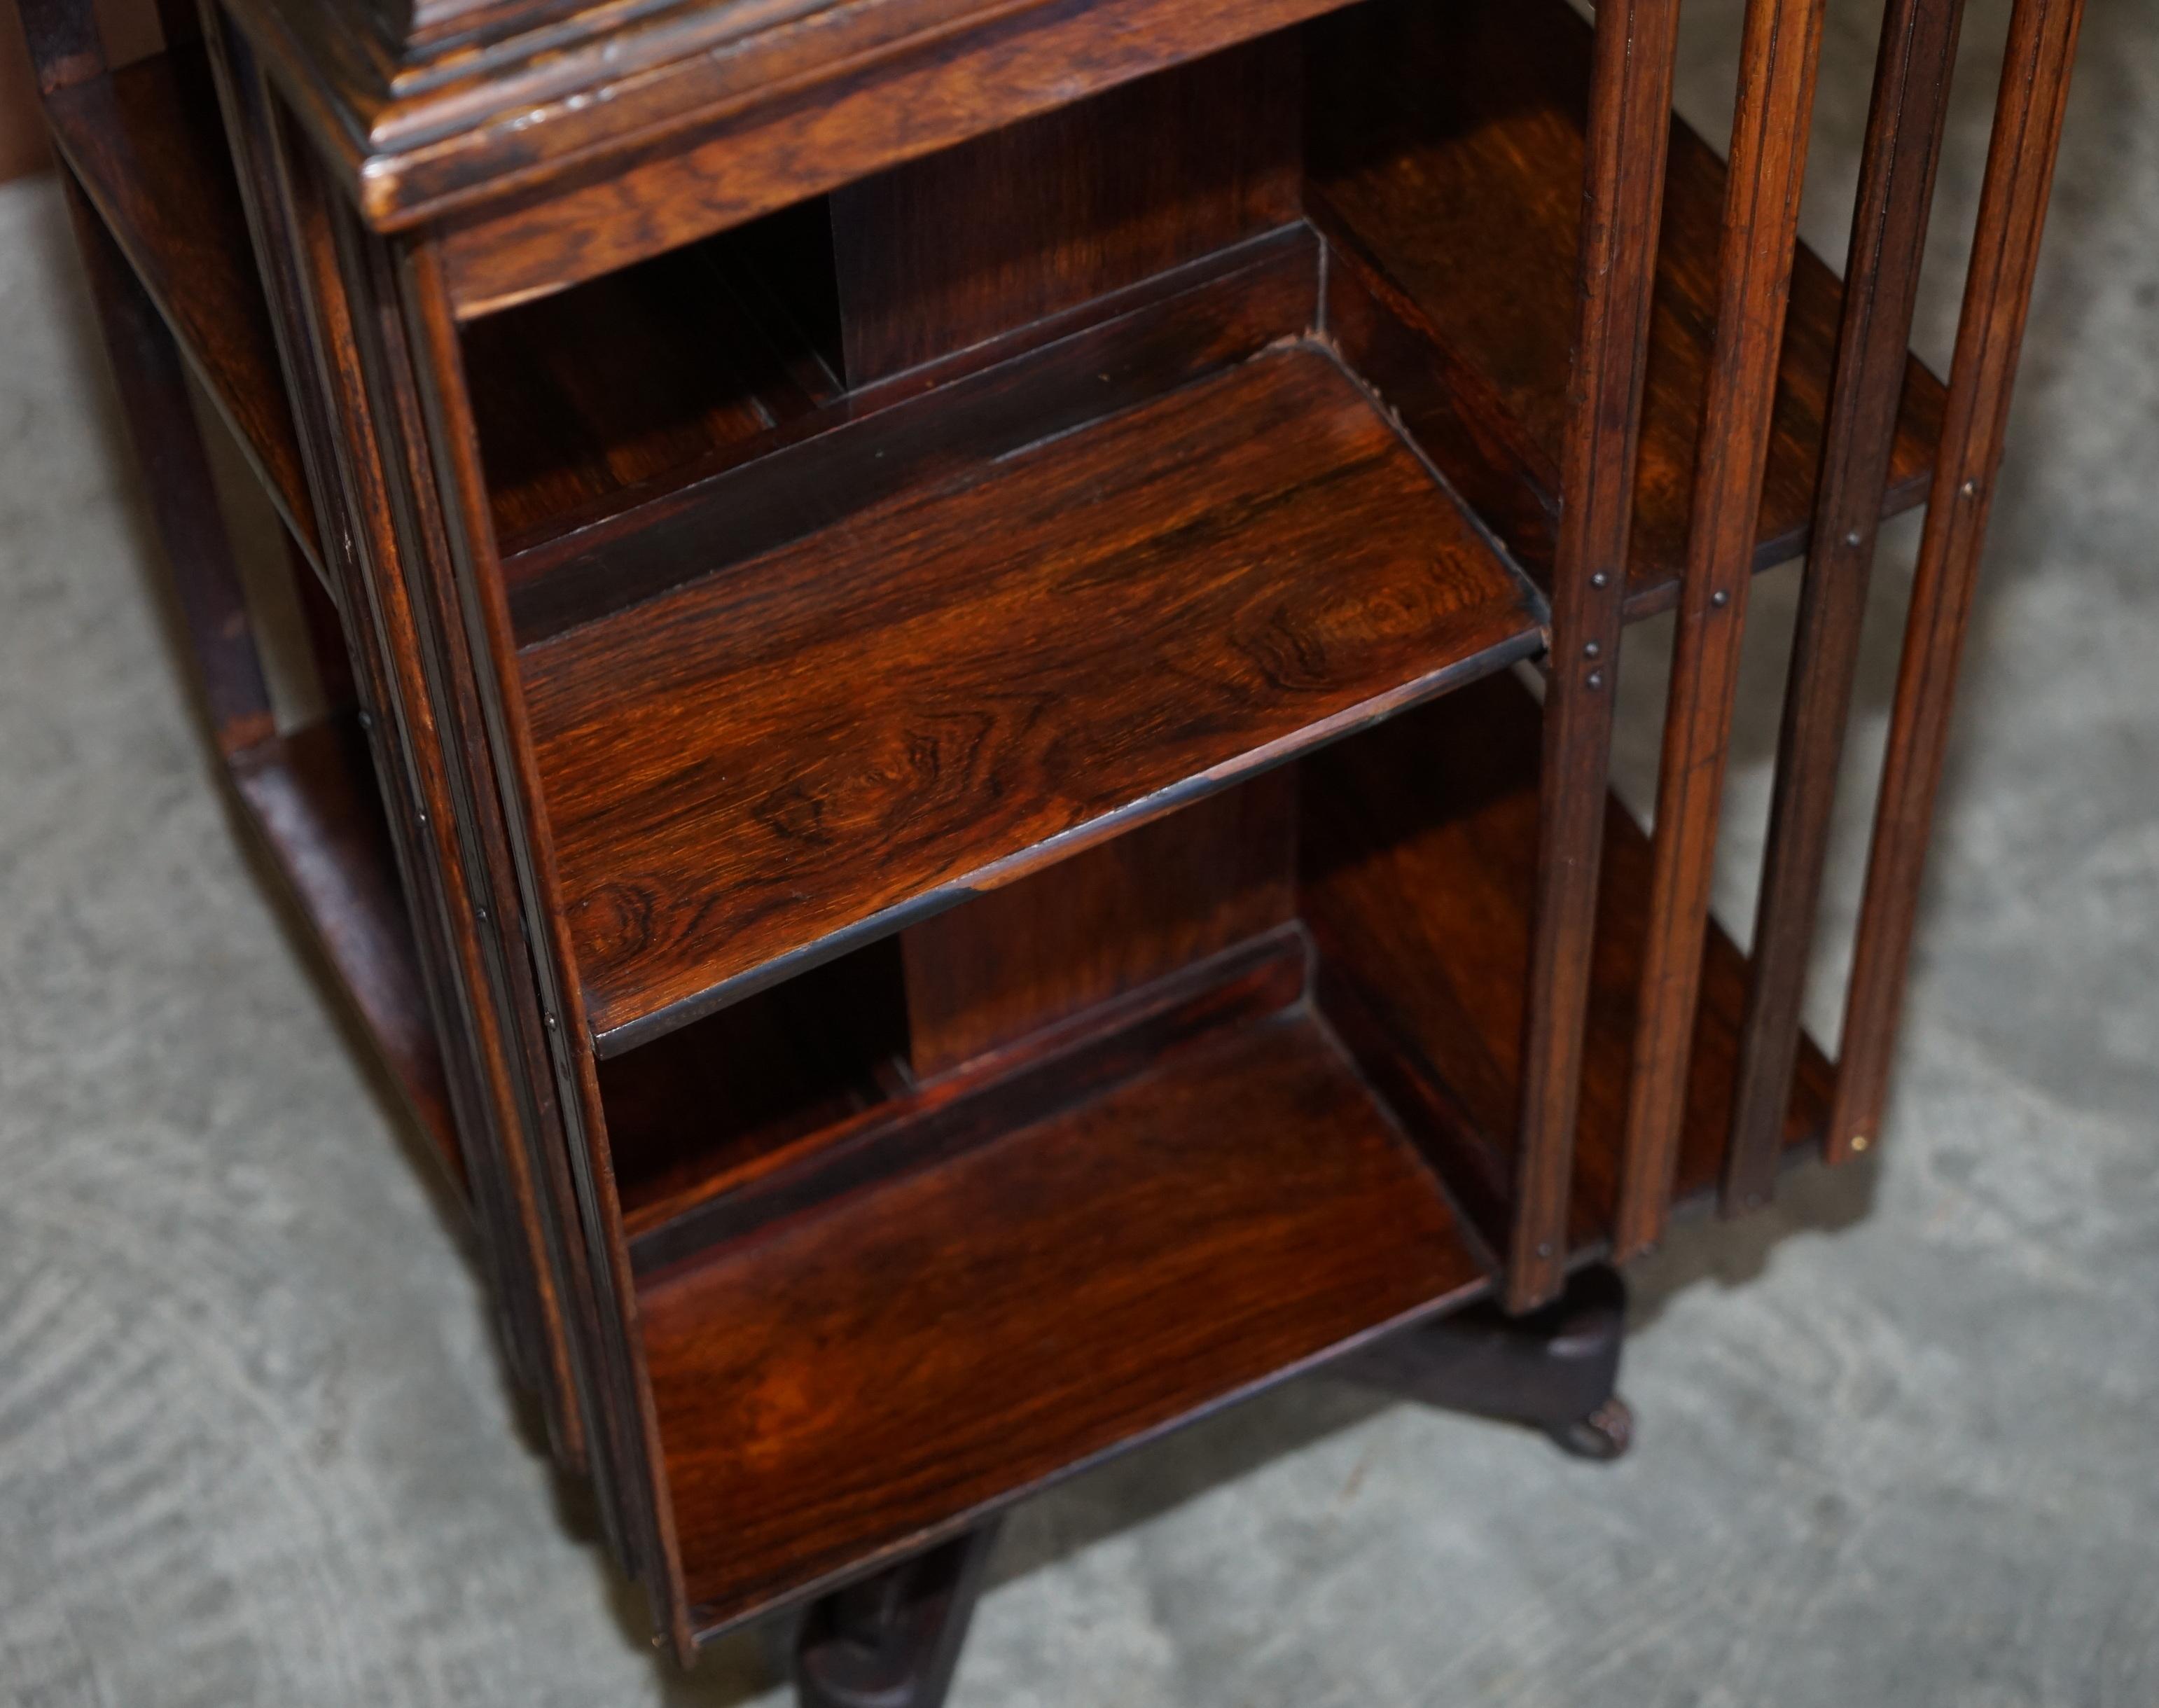 Hand-Crafted Circa 1900 Edwardian Hardwood Revolving Bookcase Sheraton Inlaid Book Table For Sale